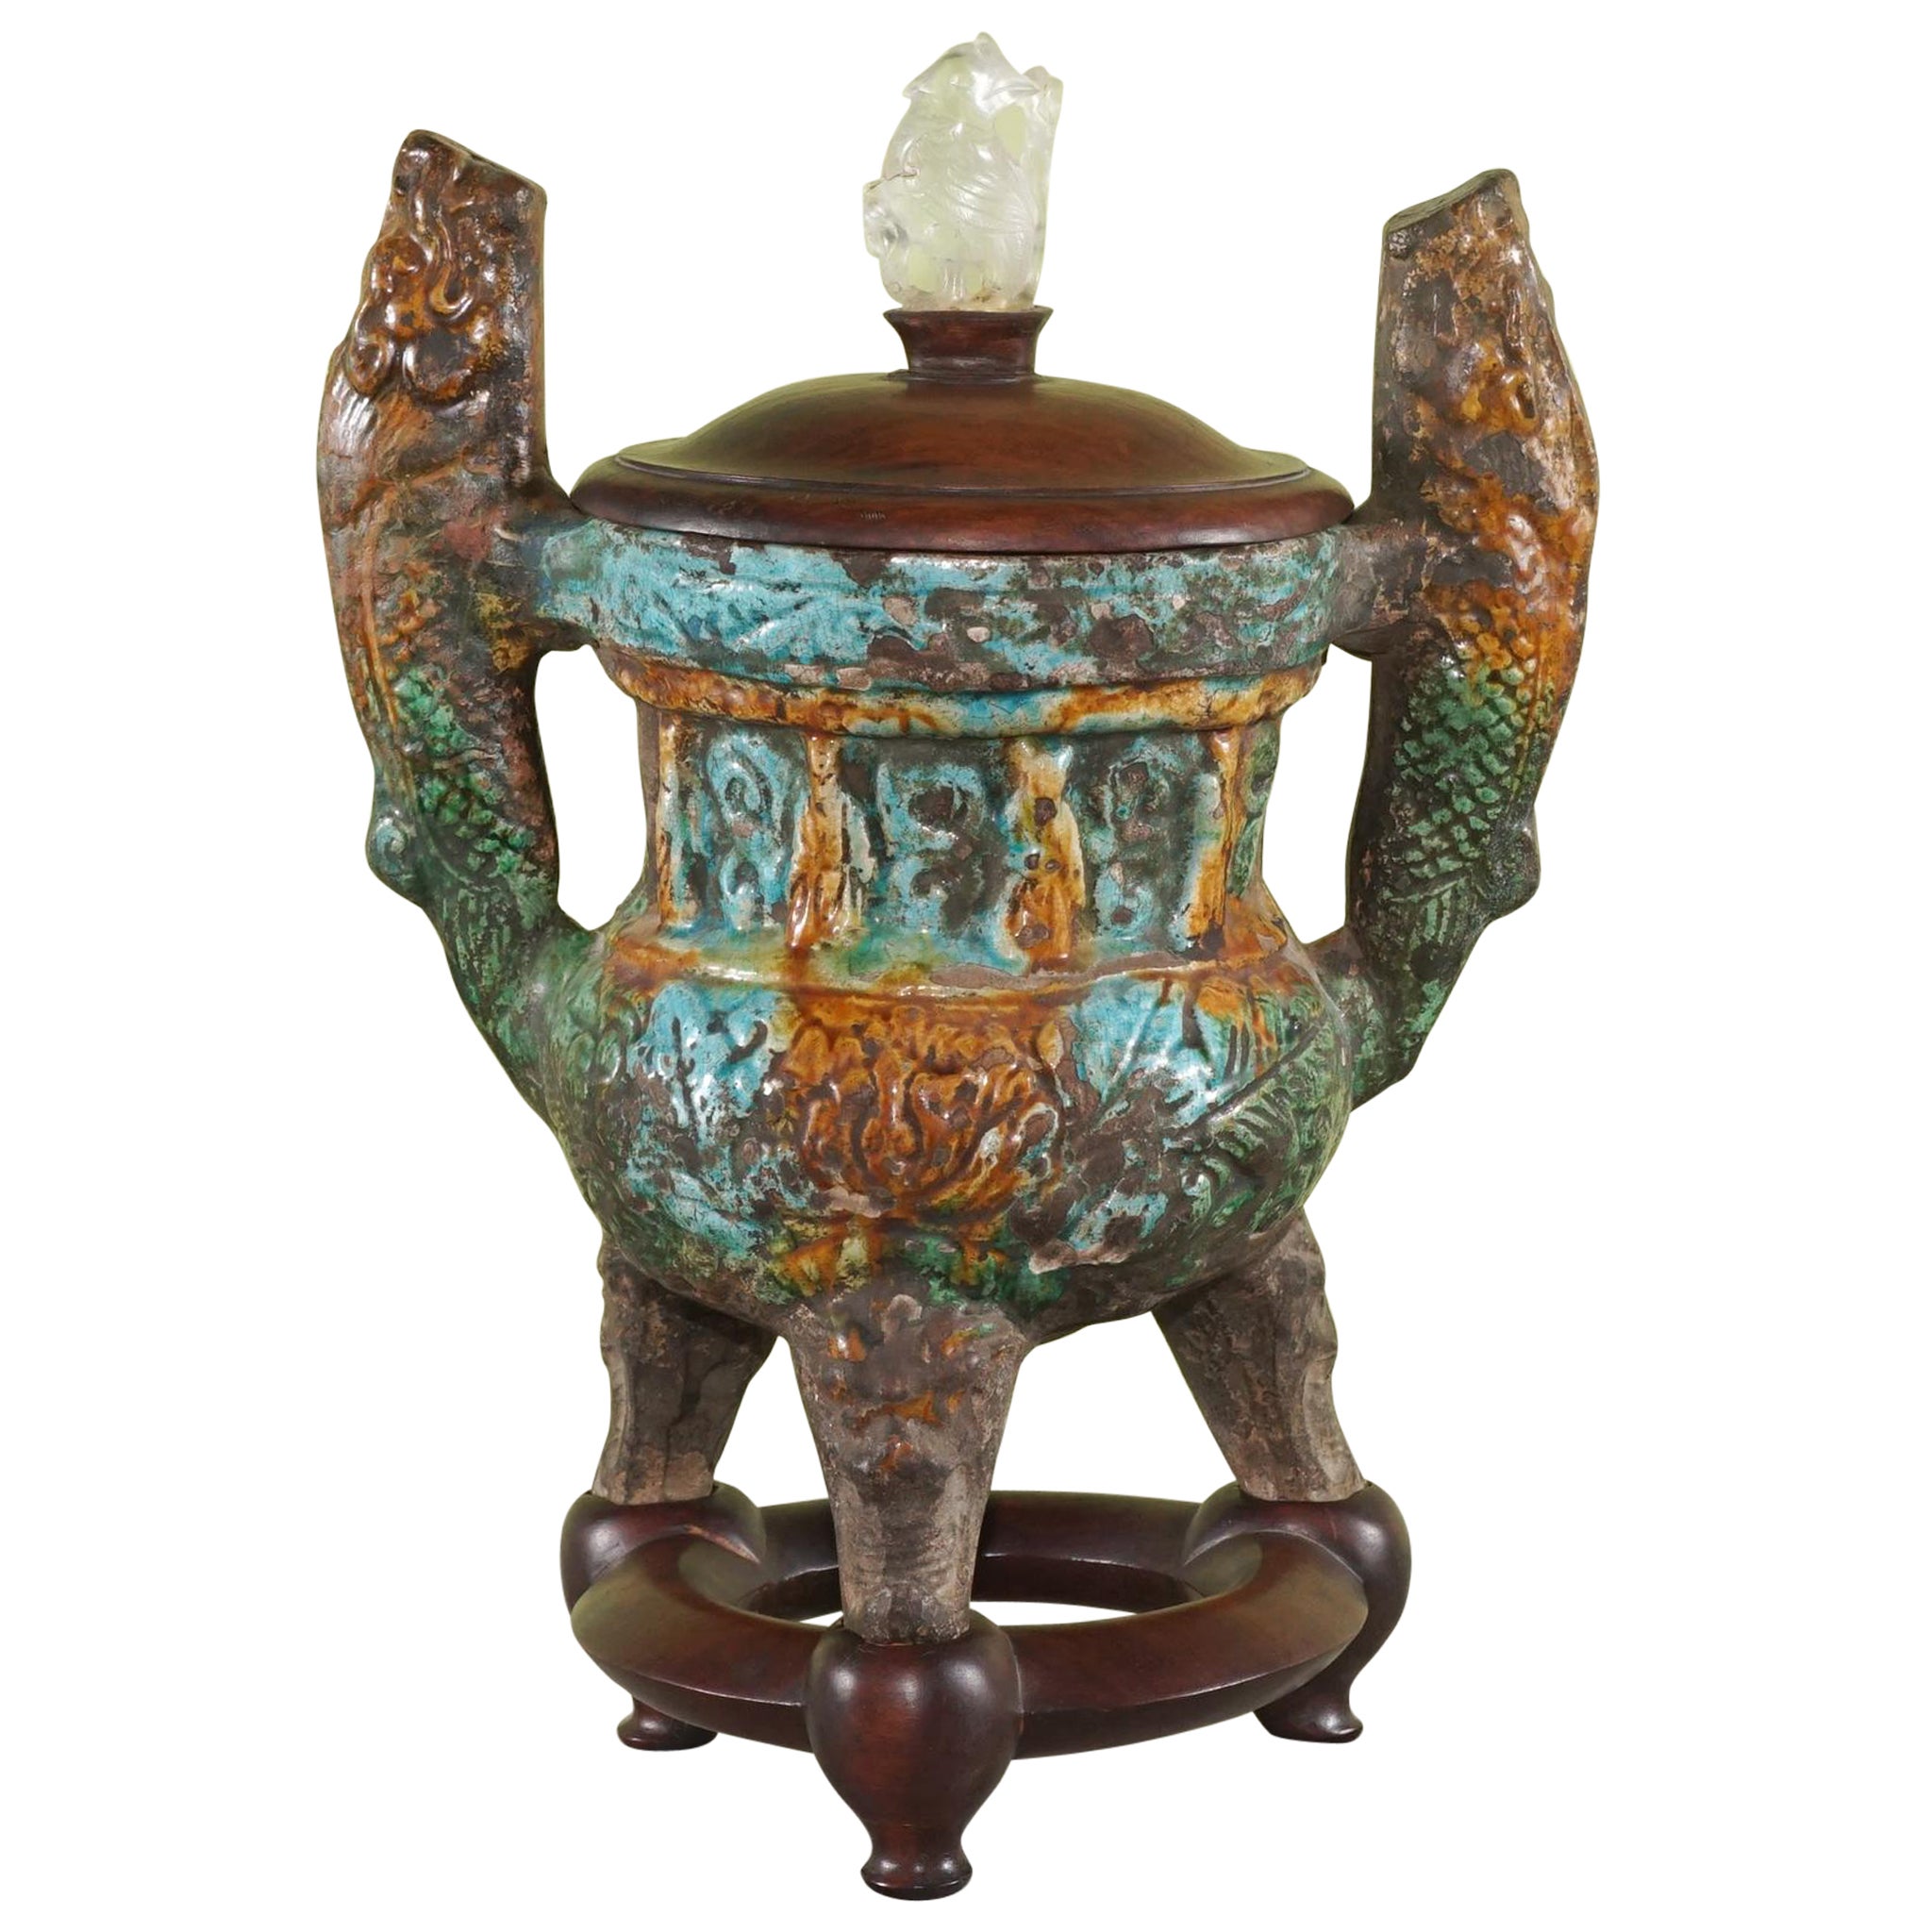 Chinese Ming period Dynasty Buddhist Incense Burner with a Rock Crystal Finial For Sale